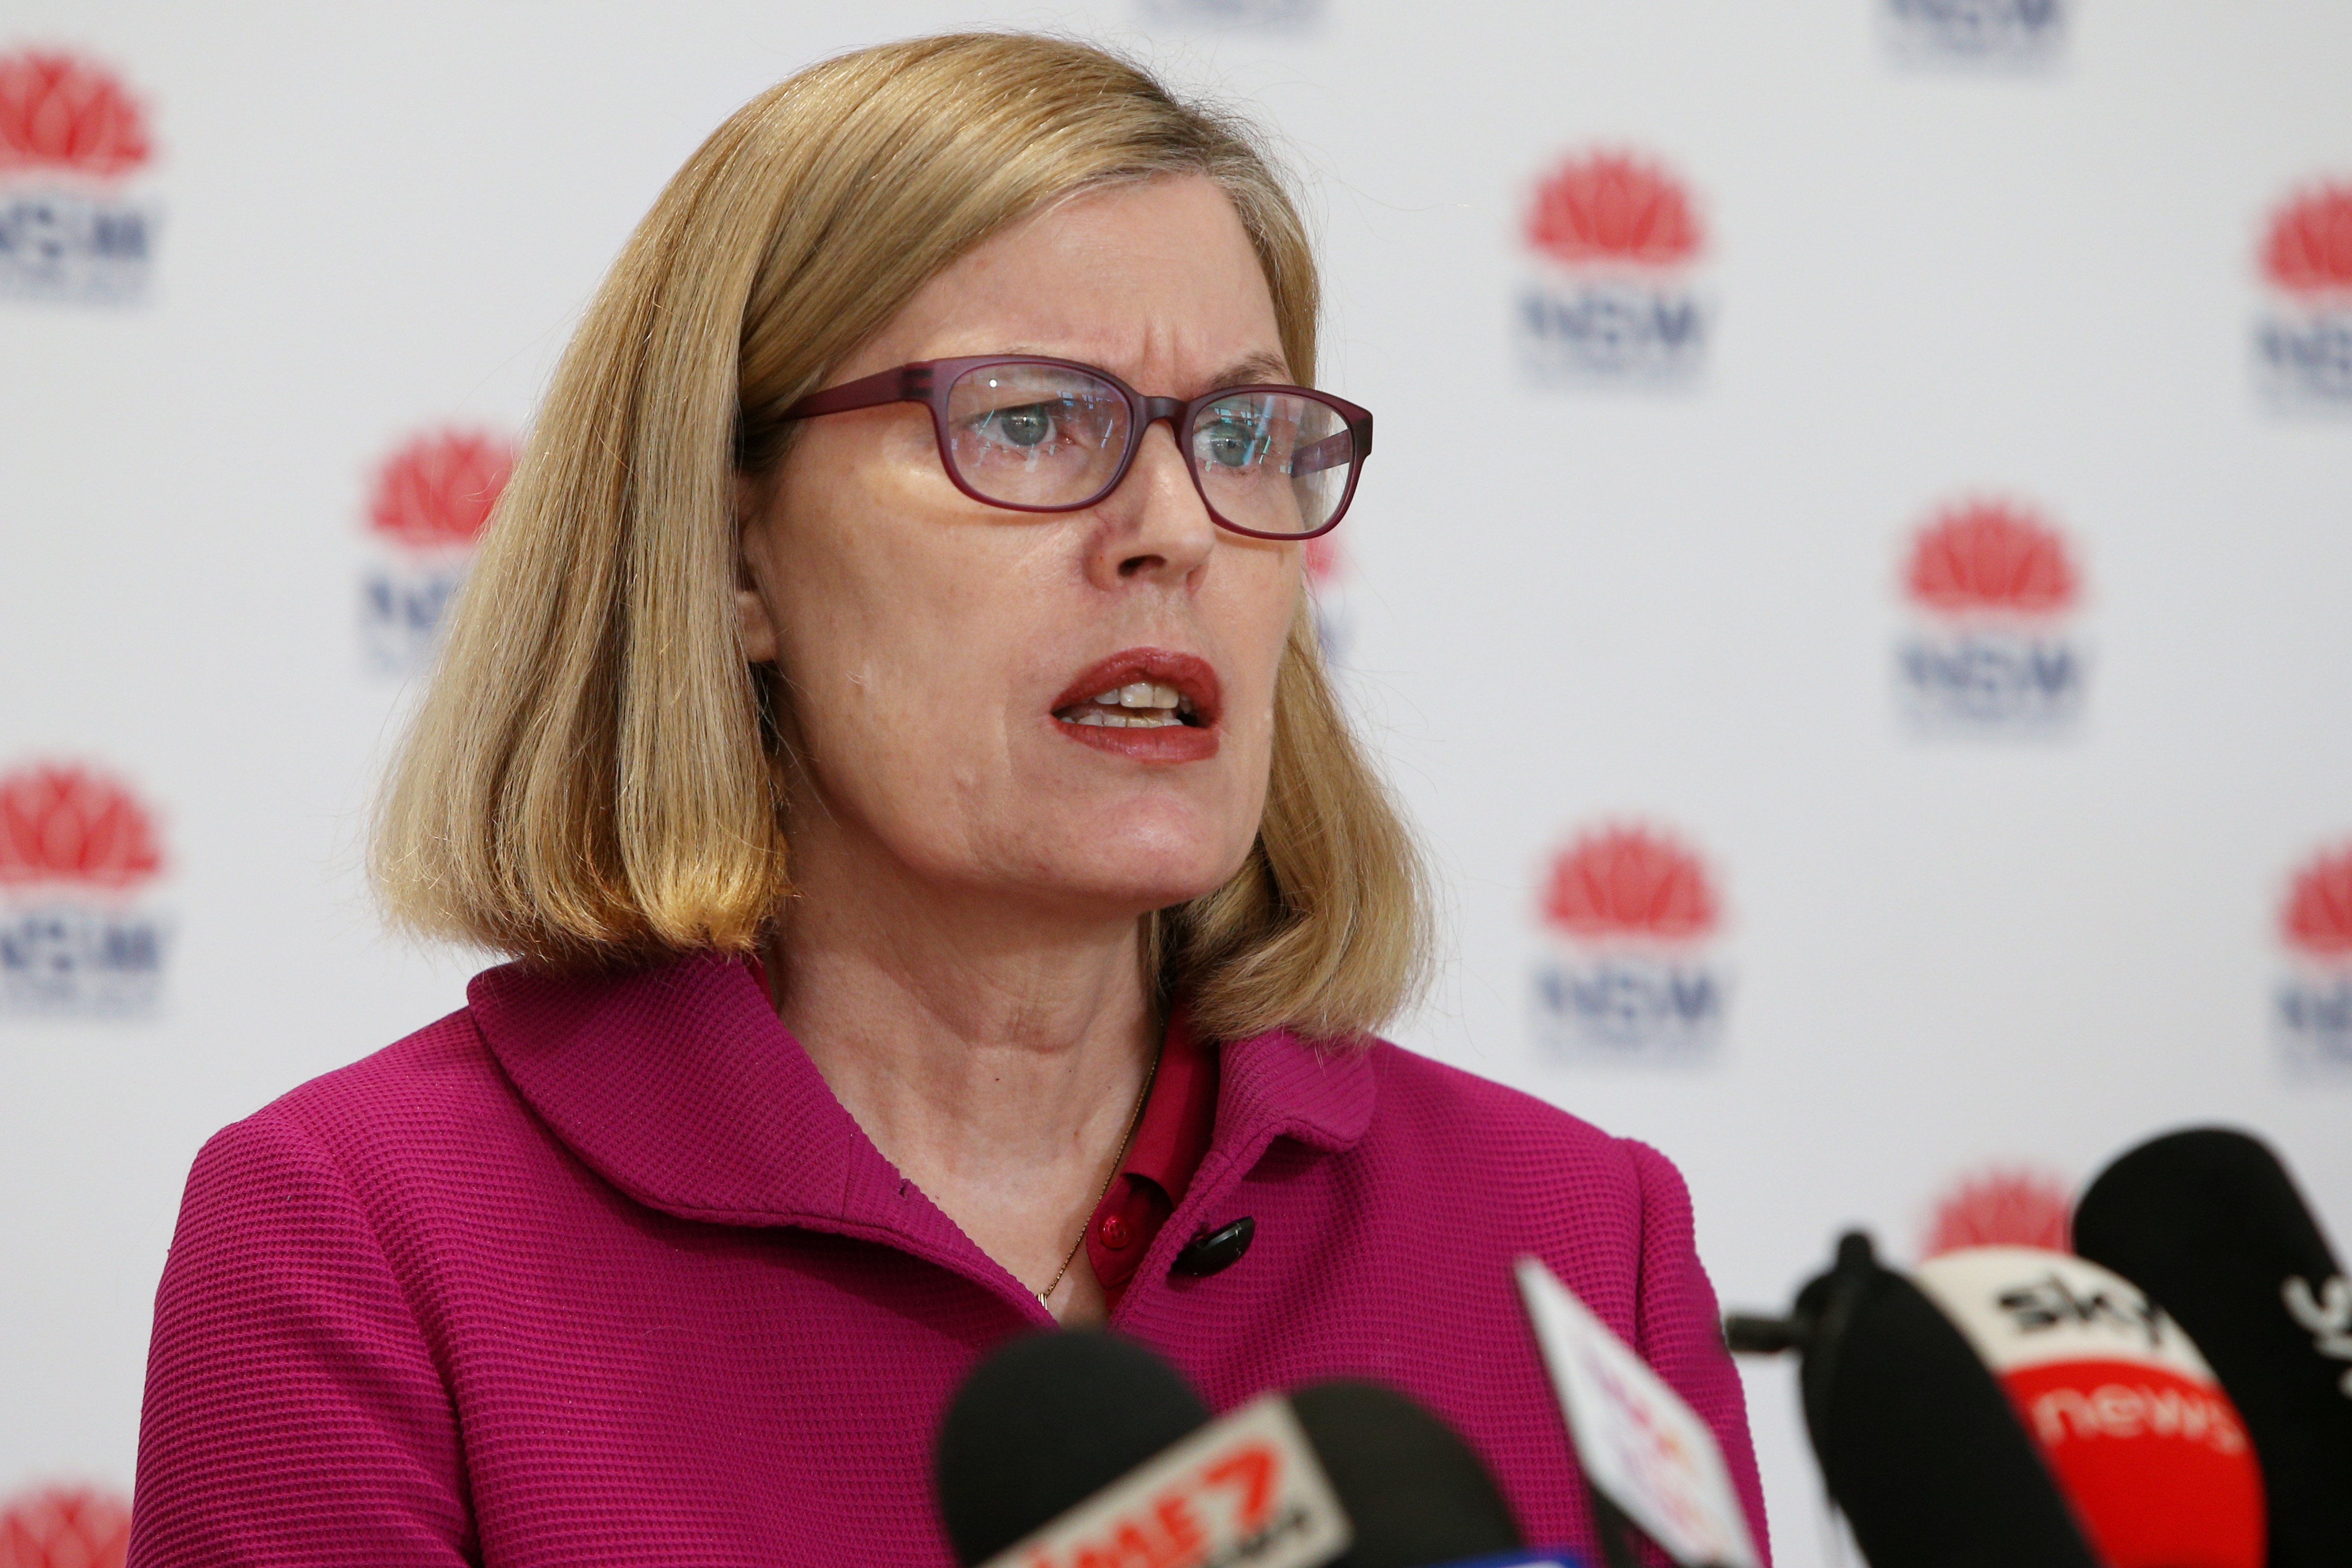 NSW Chief Health Officer Dr Kerry Chant speaks to the media during a COVID-19 update and press conference in Sydney, Wednesday, 28 July, 2021.